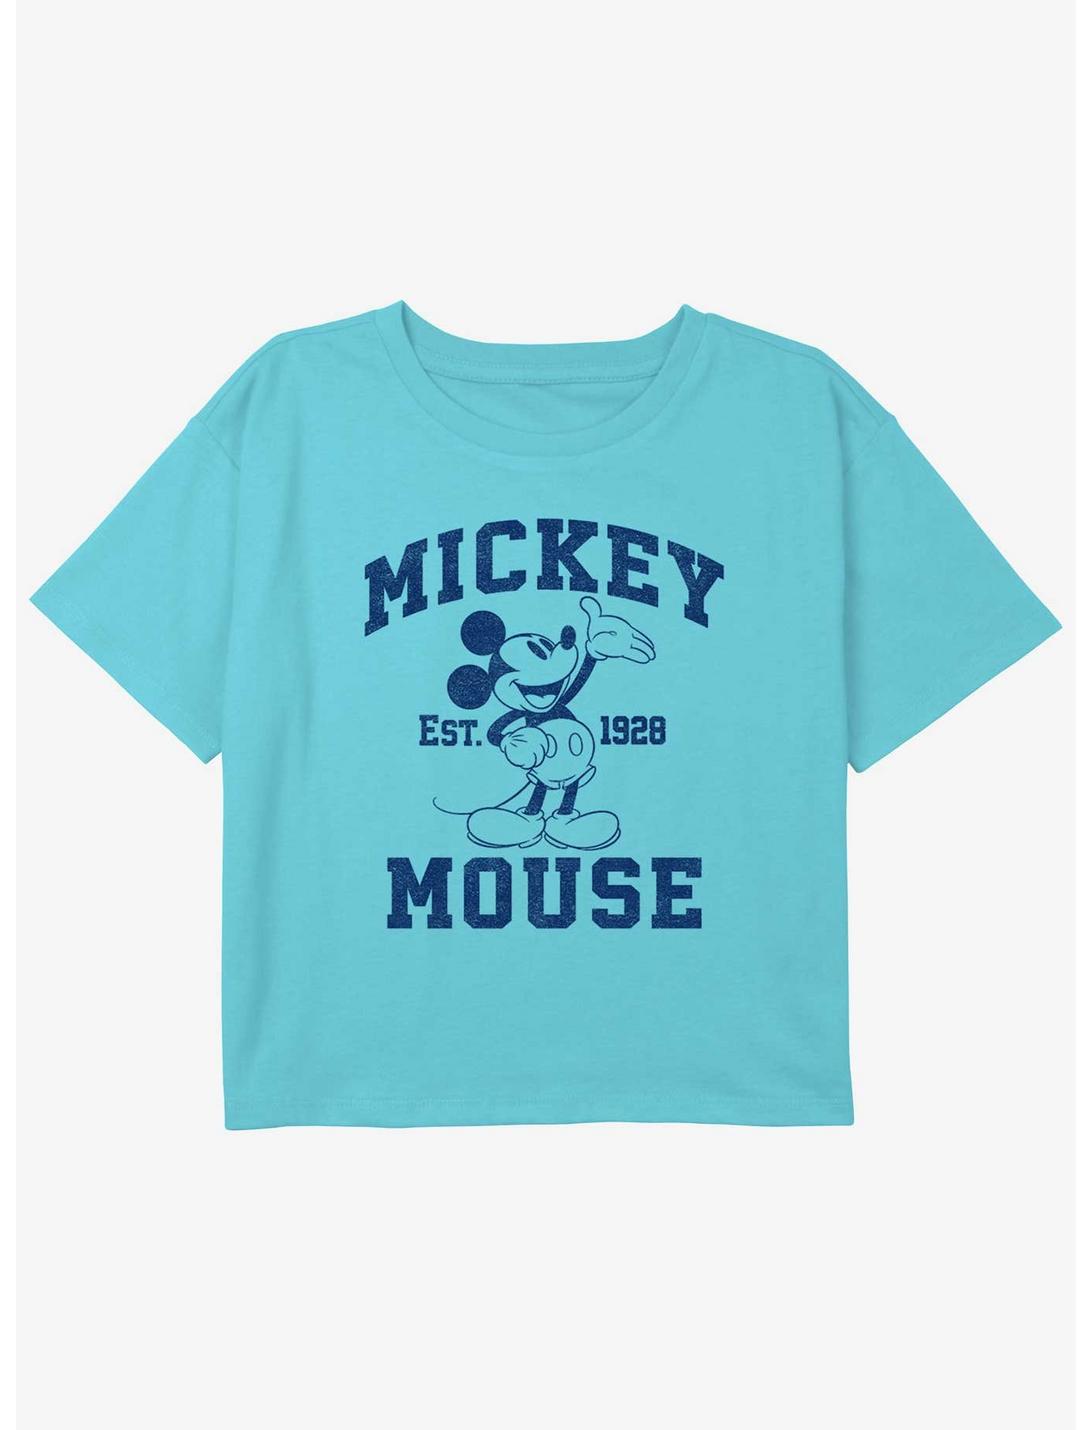 Disney Mickey Mouse Since 1928 Girls Youth Crop T-Shirt, BLUE, hi-res